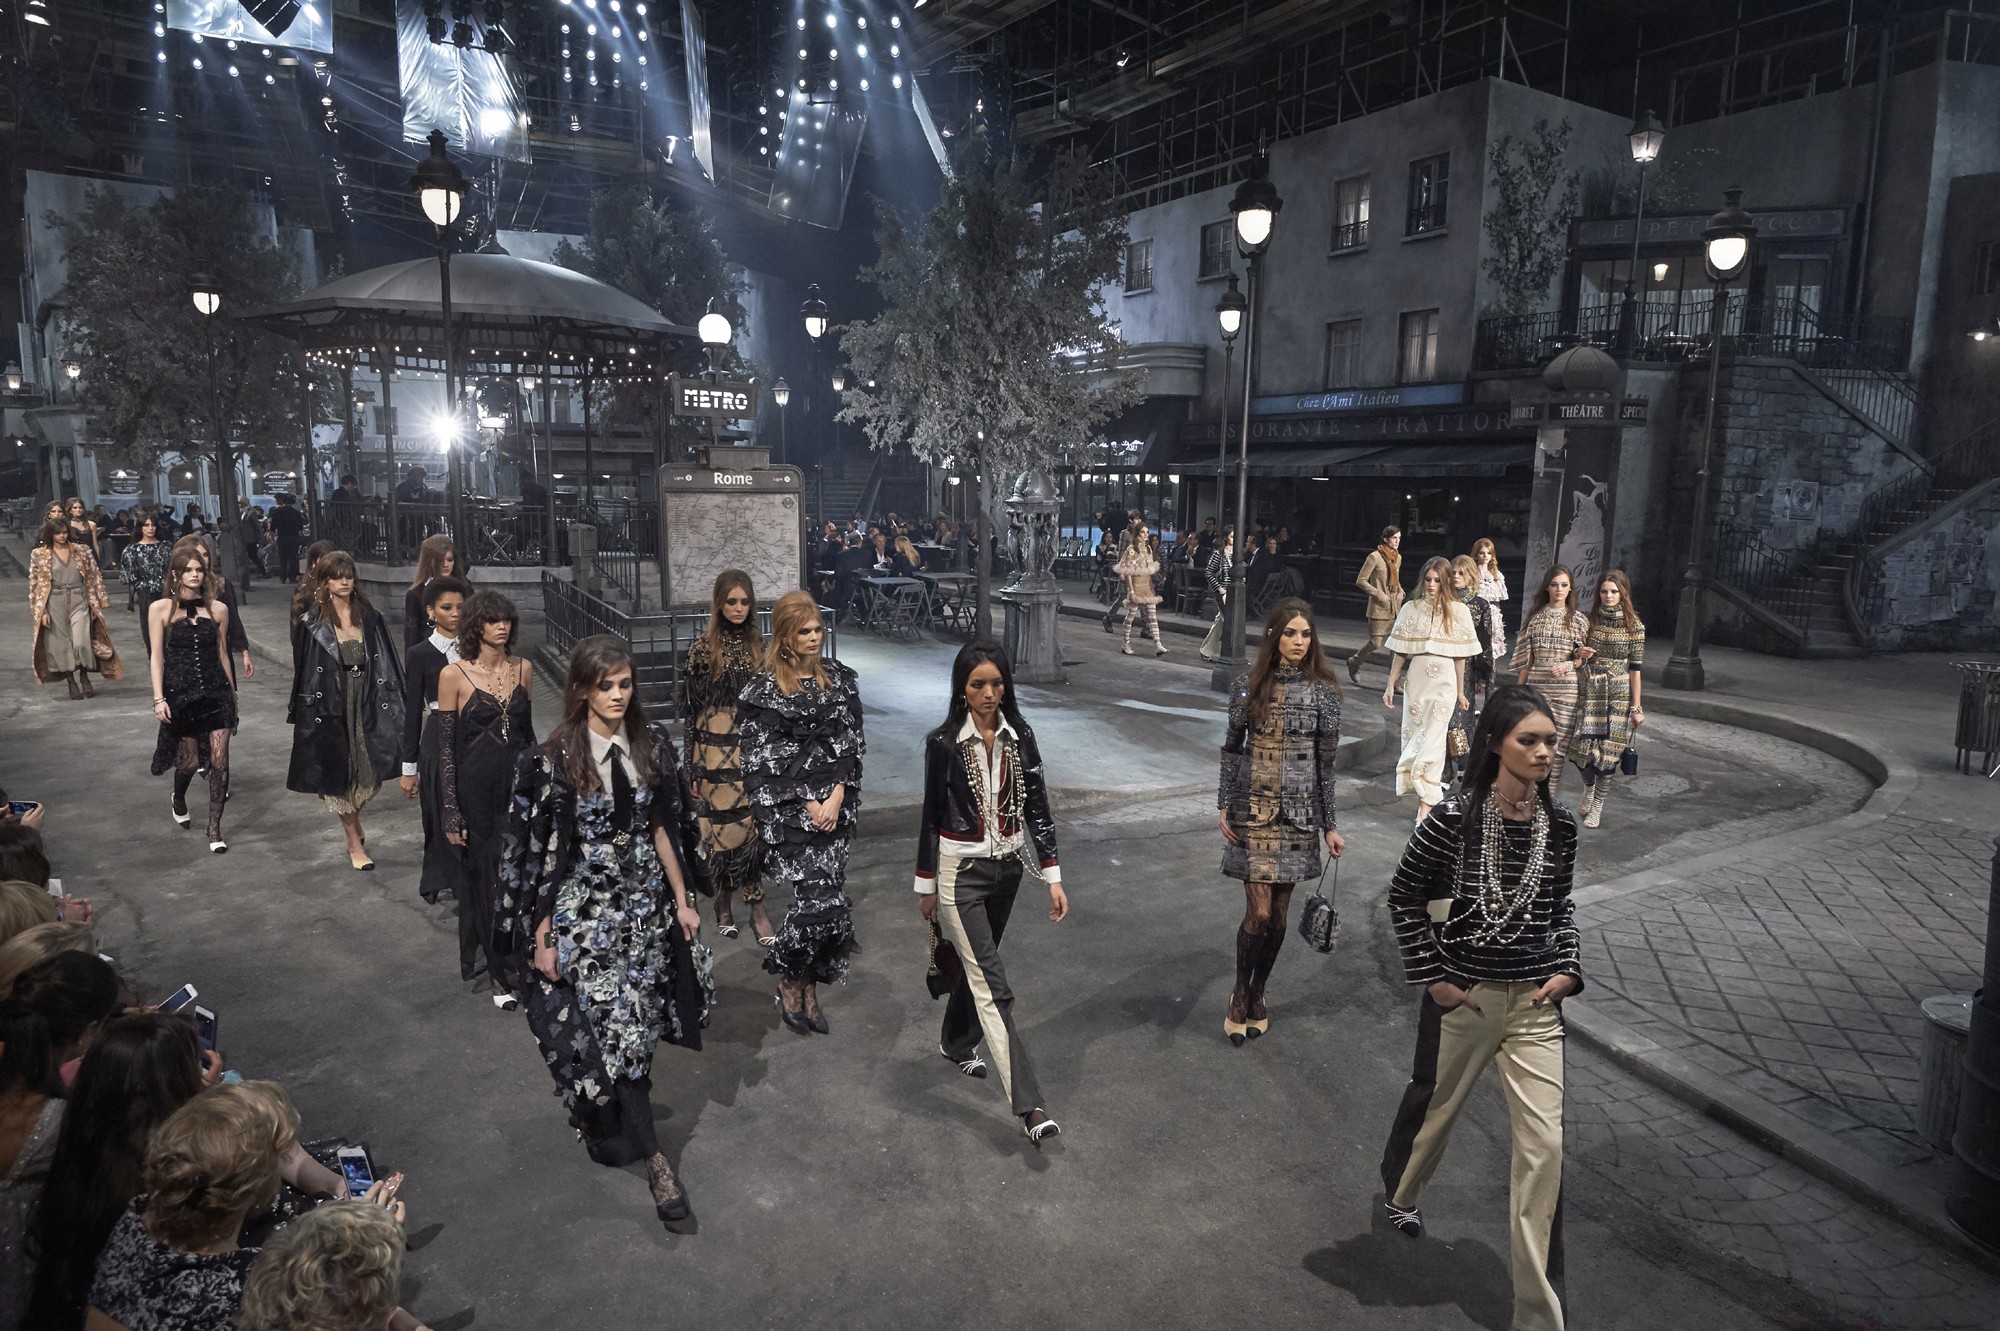 The set at Chanel's Métiers d'art Paris in Rome 2015/16 show in the Cinecittà Studios. The black and white set was reminiscent of those by Alexandre Trauner, the famous production designer (Foto: Olivier Saillant)